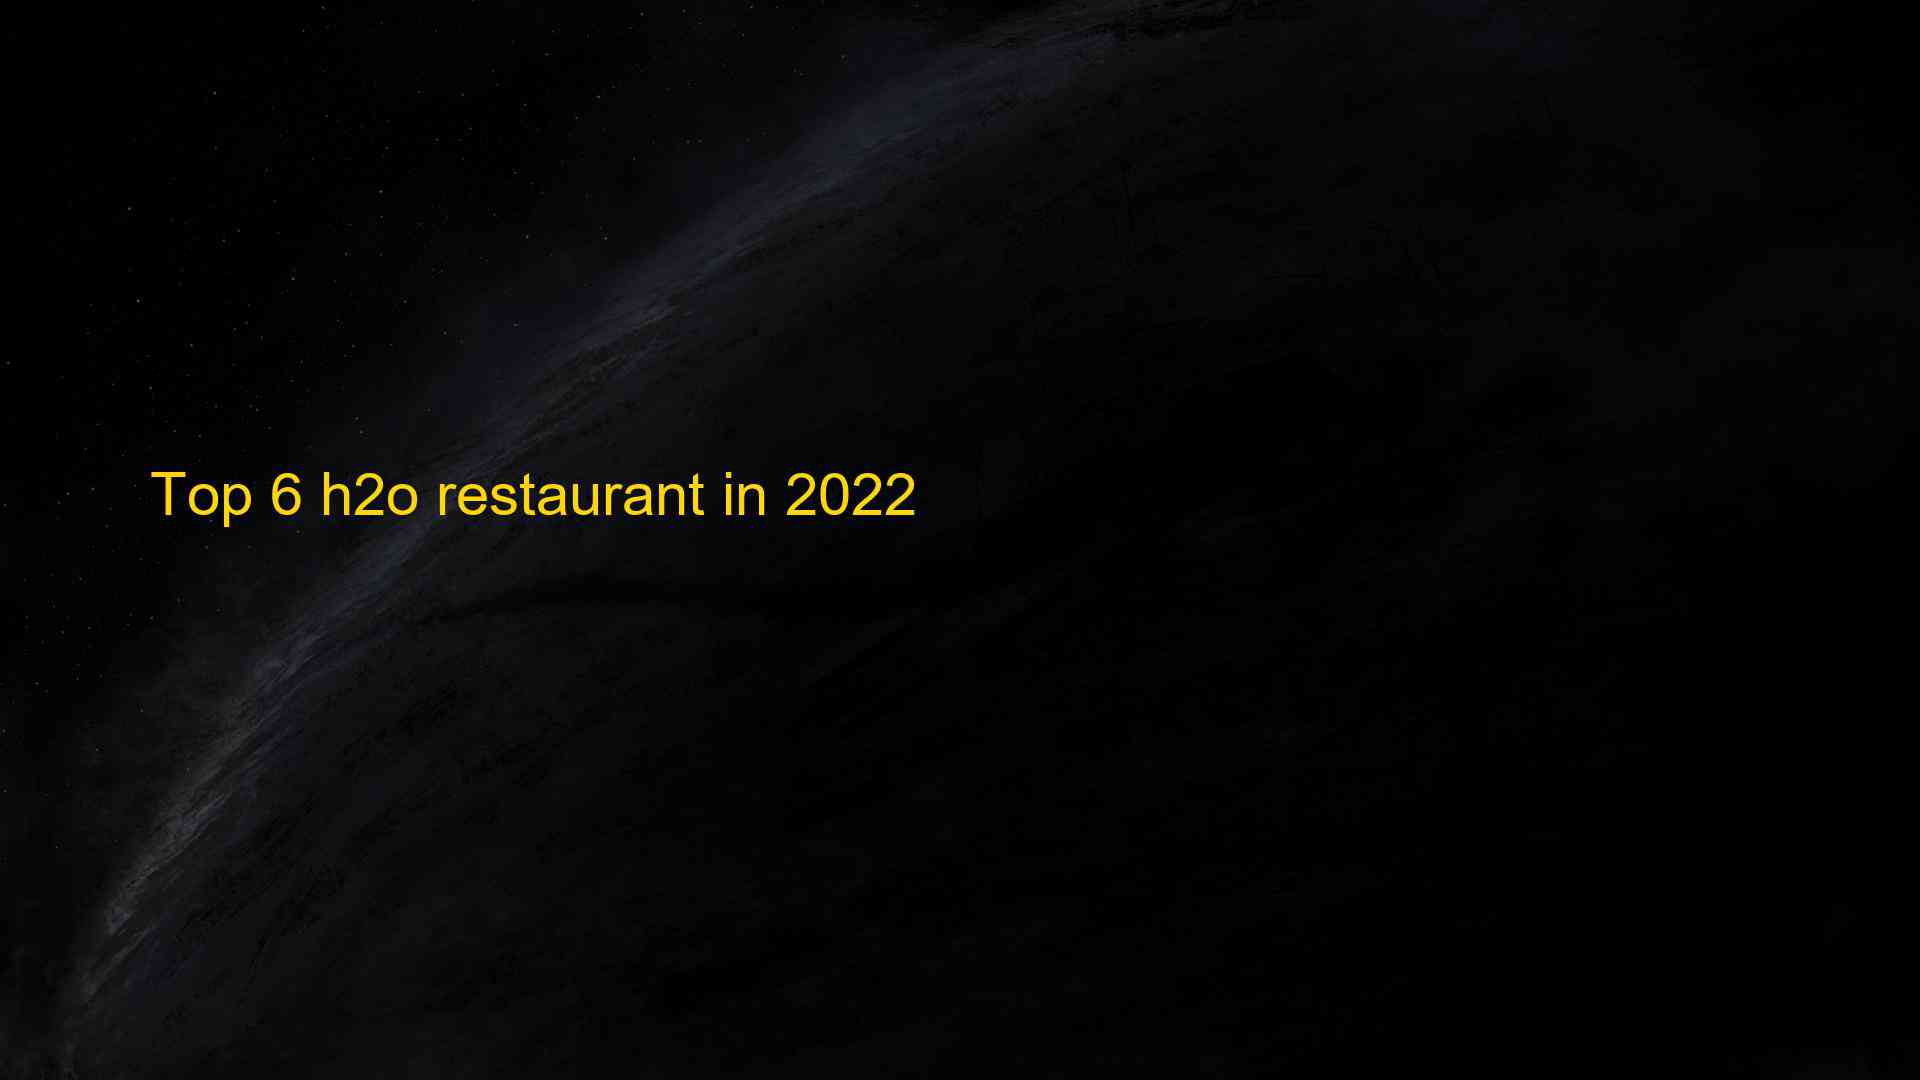 Top 6 h2o restaurant in 2022 1662967398